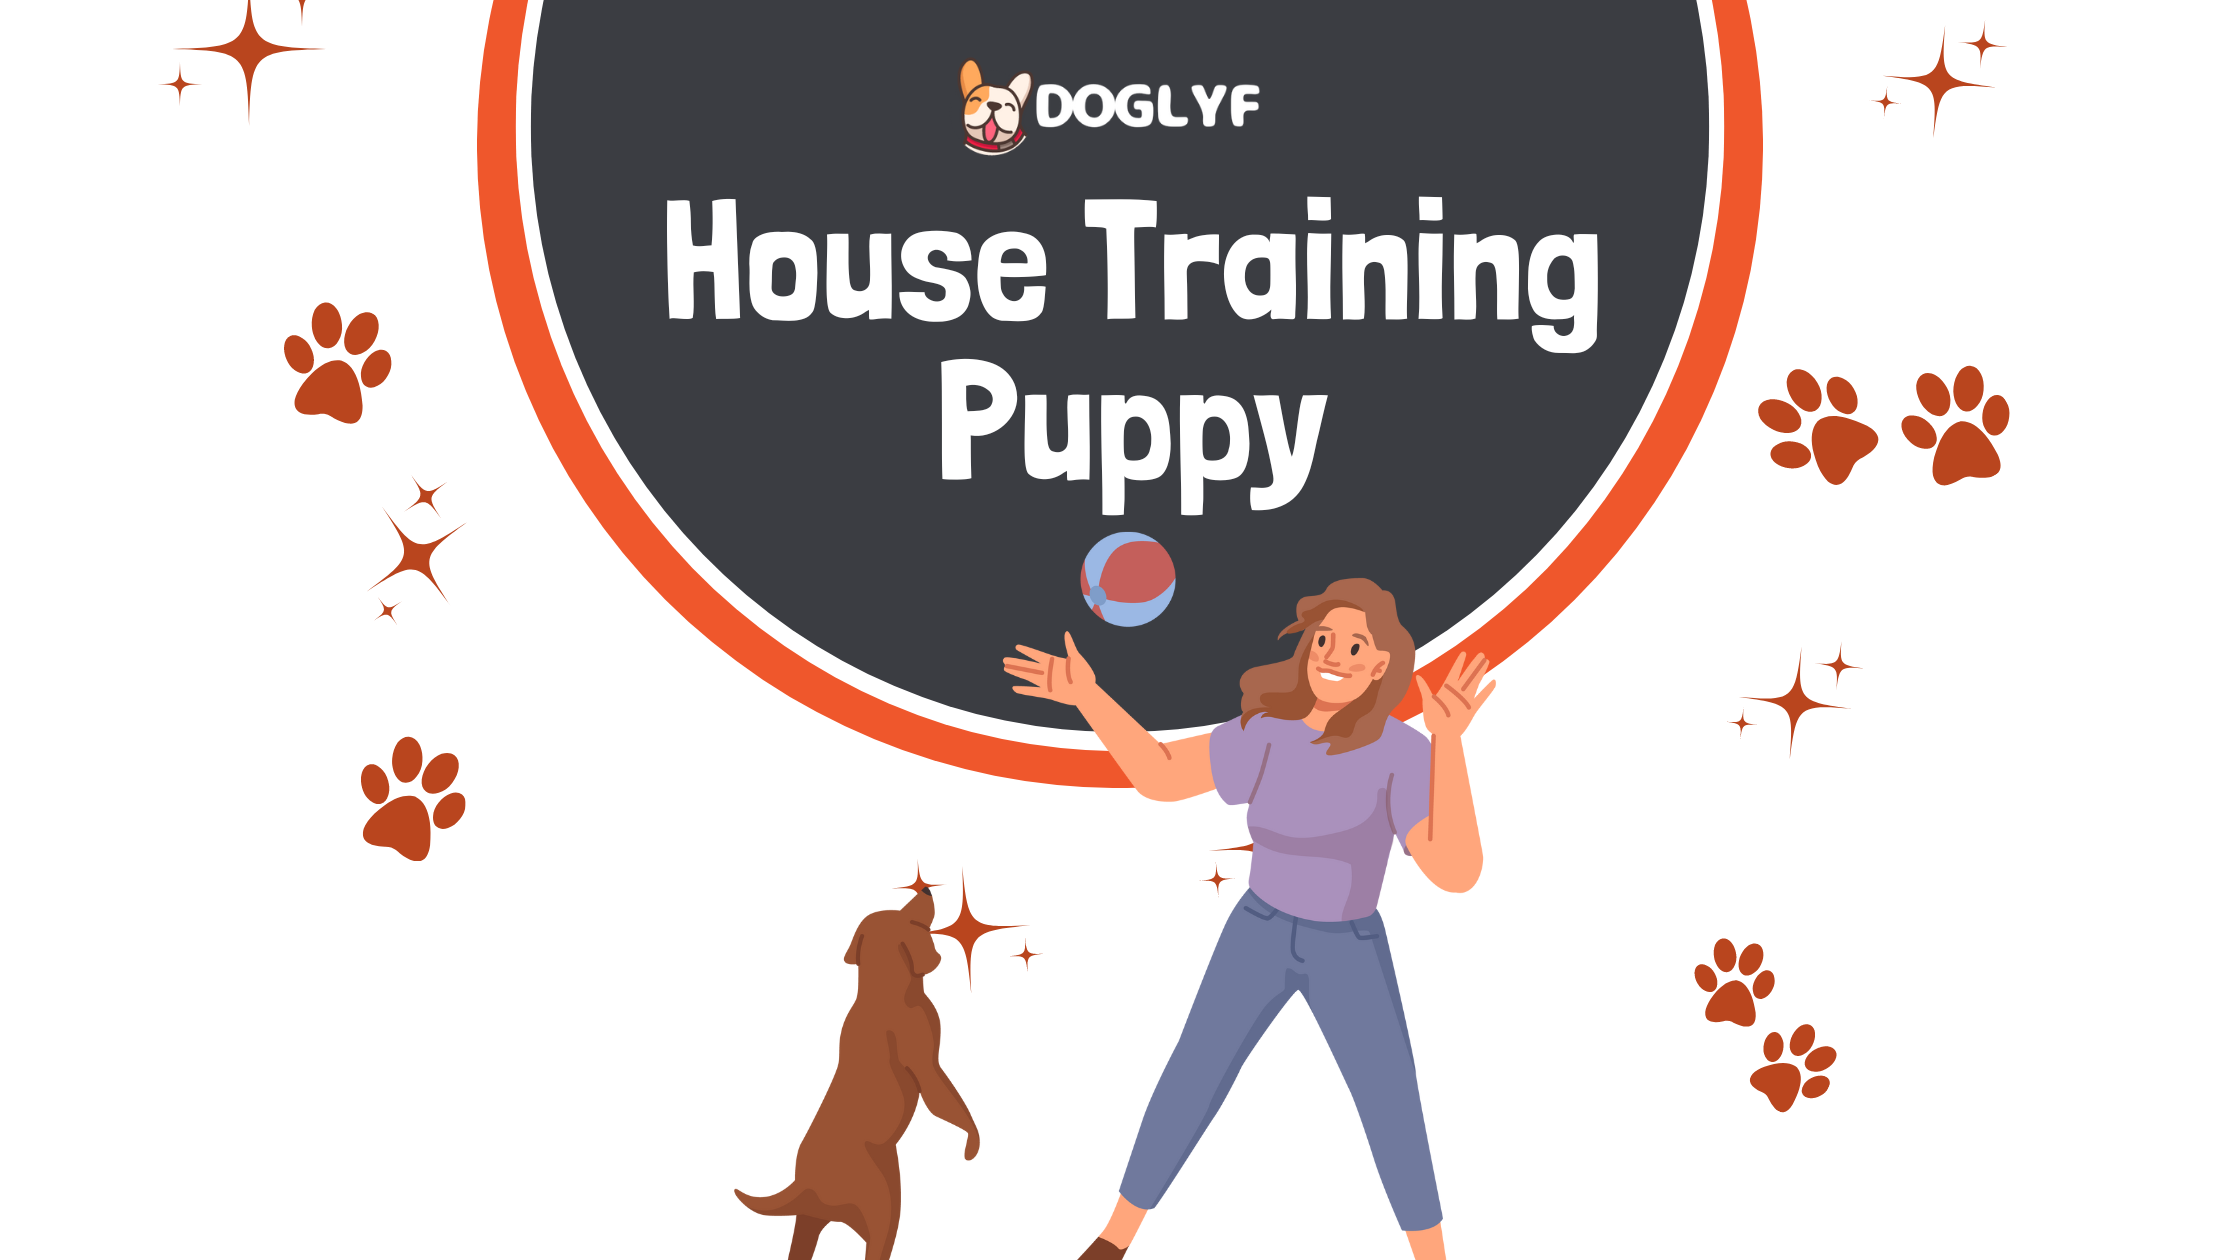 House Training Puppy: 7 Proven Strategies for a Happy, Well-Behaved Pet in 2023!”House Training Puppy